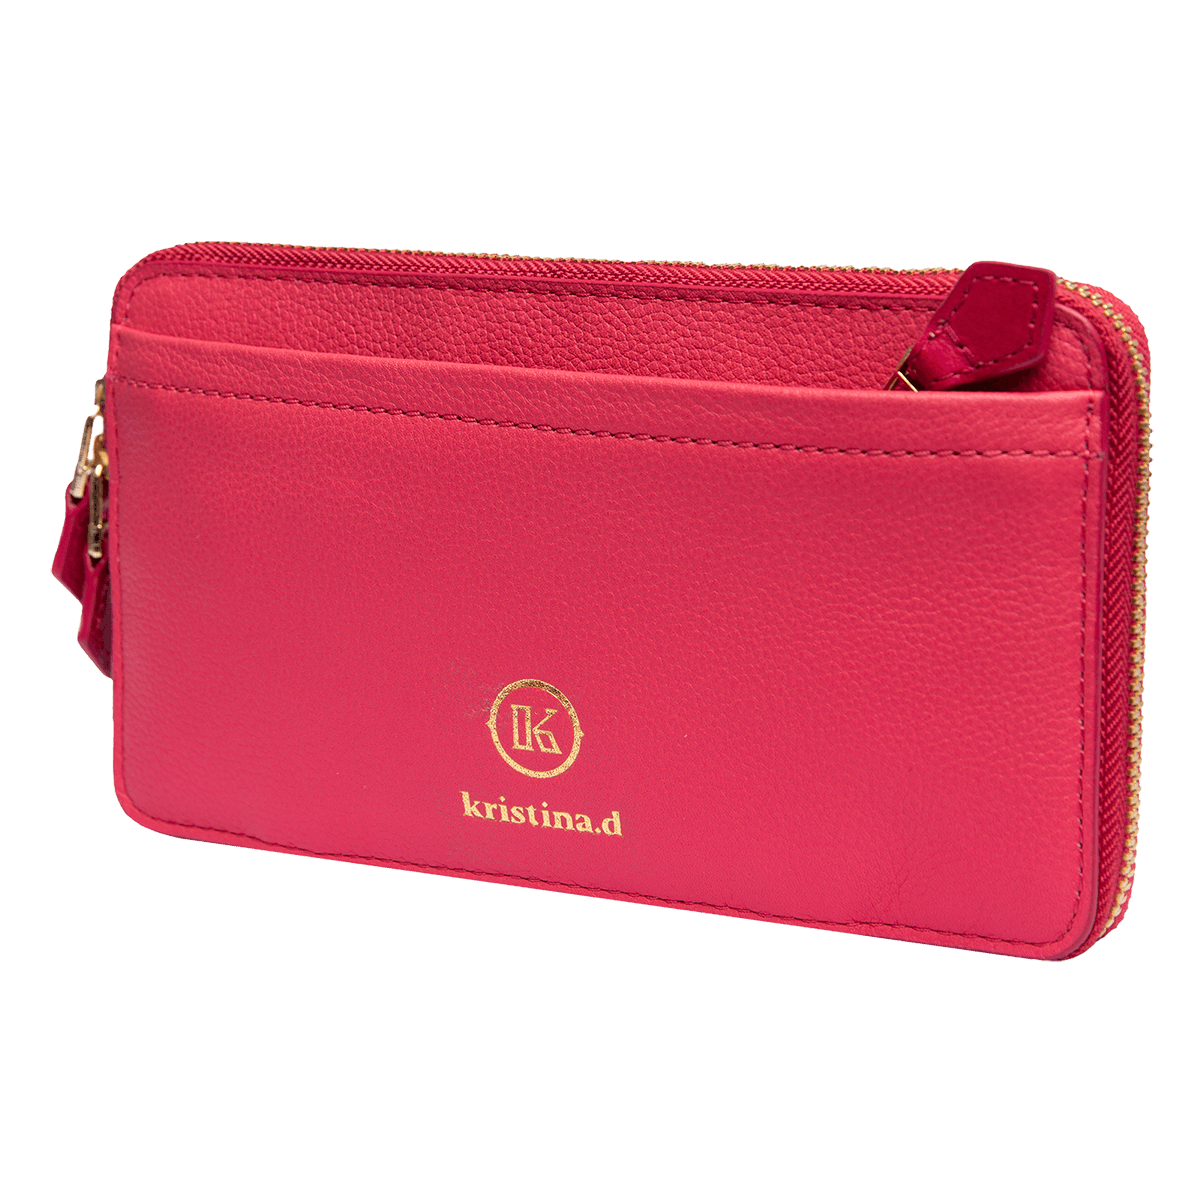 Front angled view of kristina.d luxury pink leather JULIAN Belt Bag Convertible Wallet